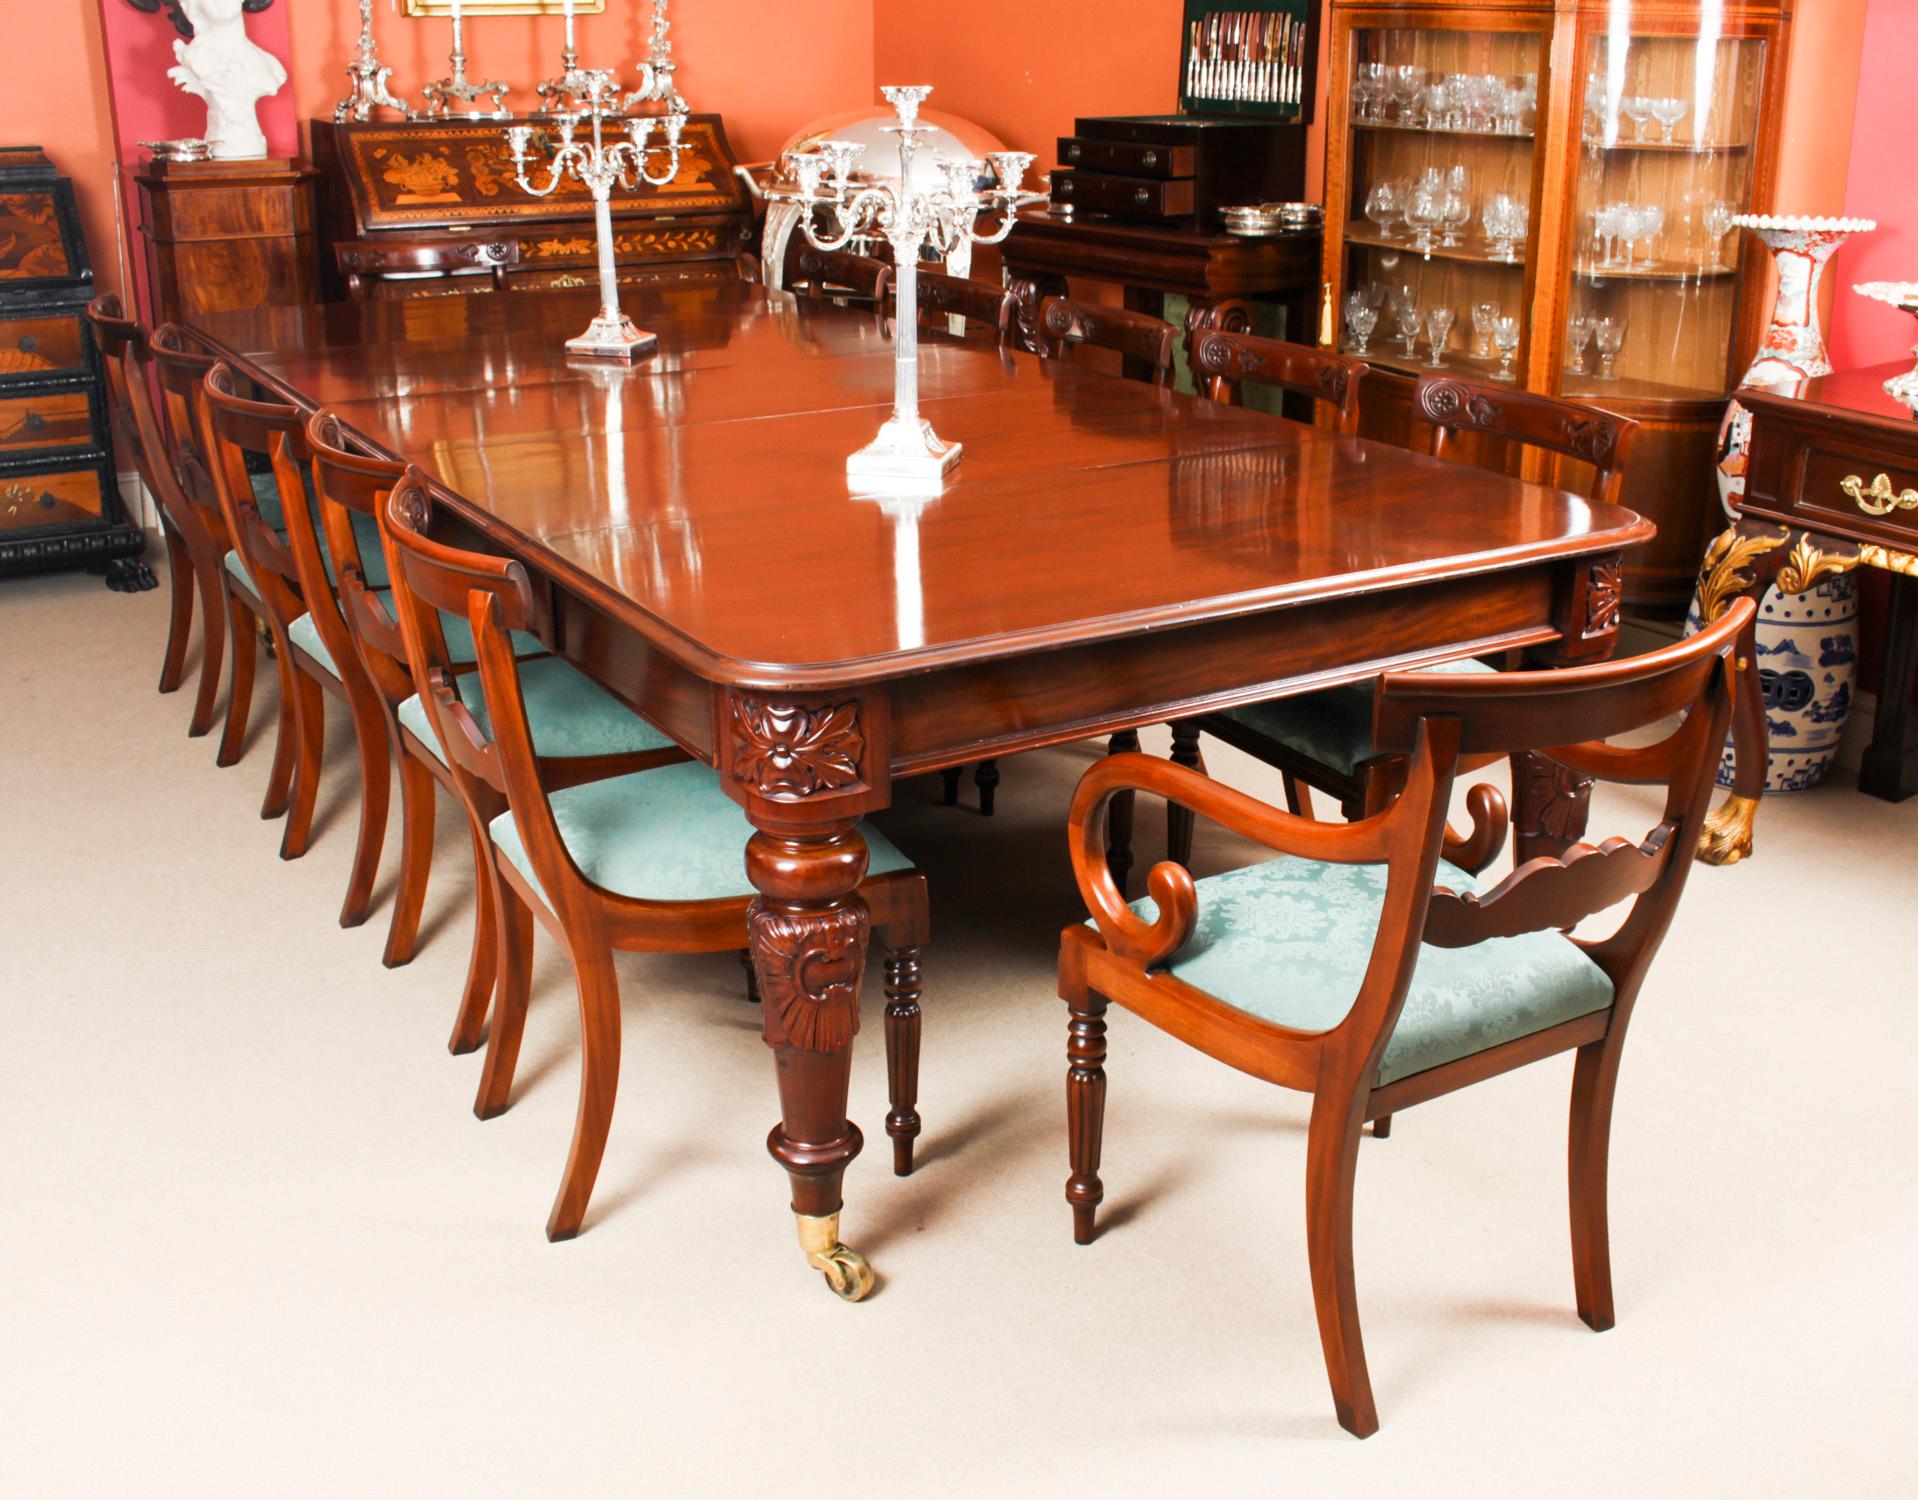 This is a fantastic dining set comprising of an antique William IV solid mahogany telescopic extending dining table, C1835 in date, with a set of twelve Vintage Regency Revival barback dining chairs.

The beautiful dining table is in stunning